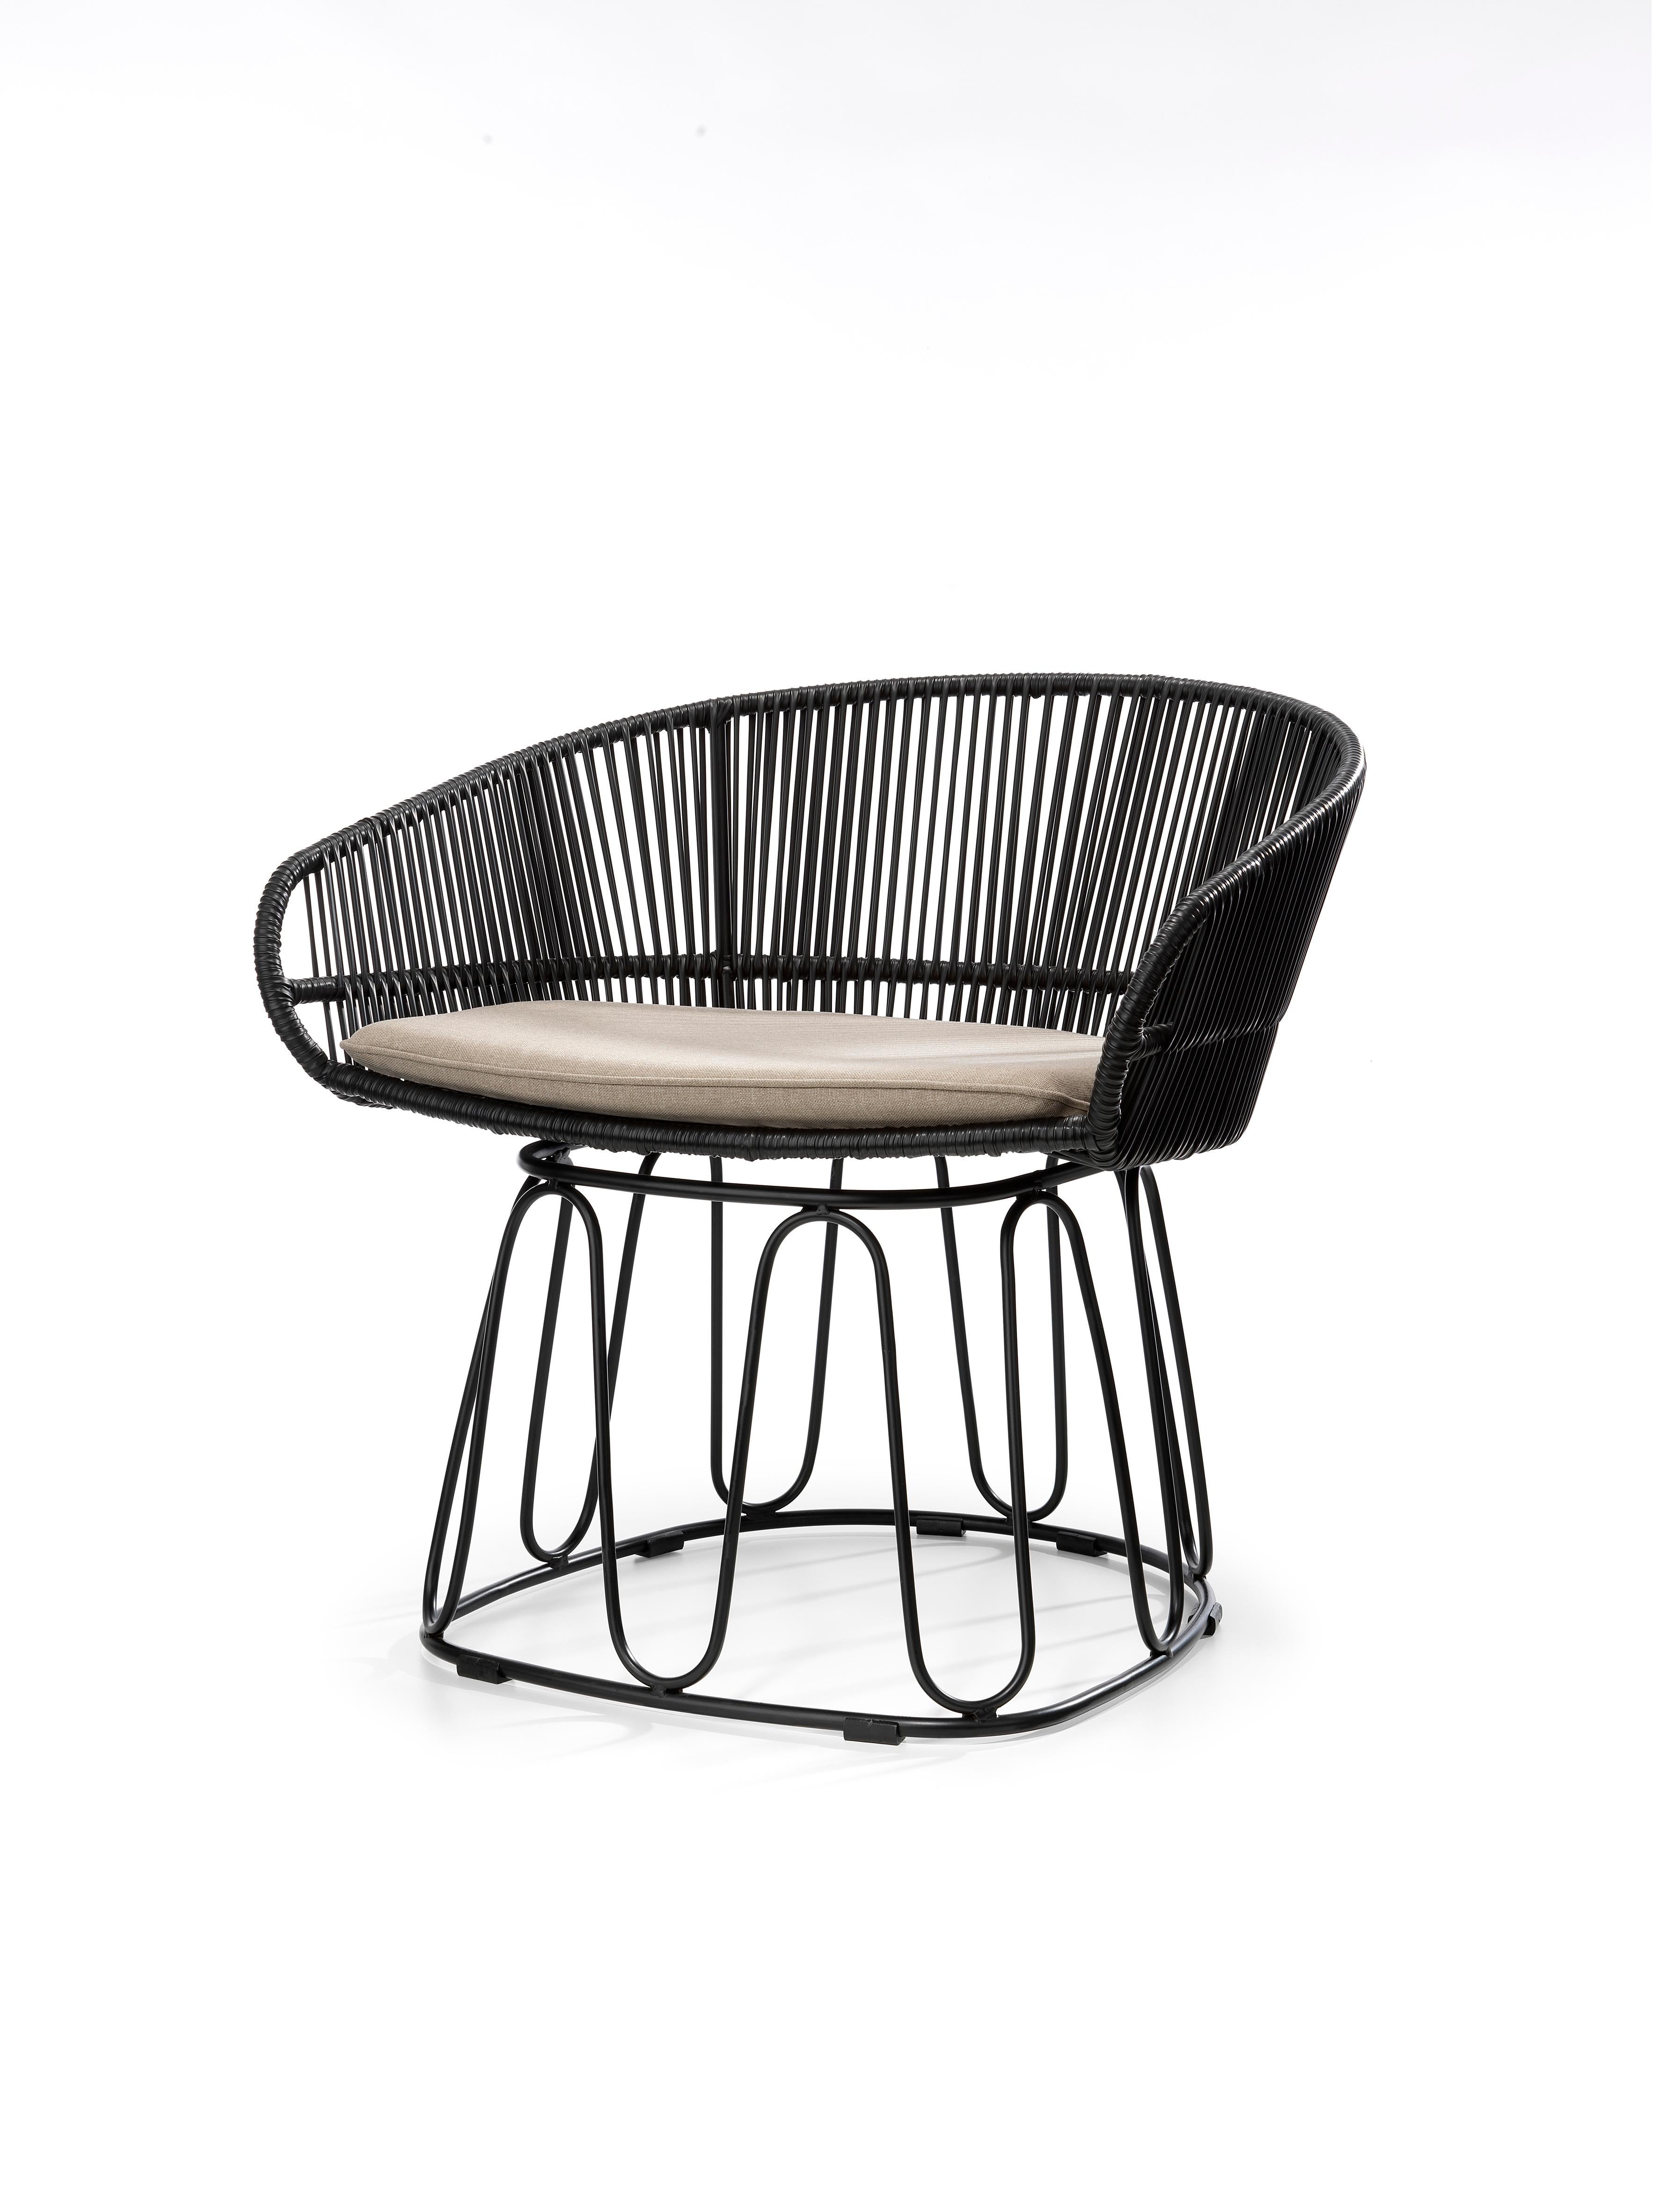 Black Circo lounge chair by Sebastian Herkner
Materials: Galvanized and powder-coated tubular steel. PVC strings.
Technique: Made from recycled plastic. Weaved by local craftspeople in Colombia. 
Dimensions: W 74 x D 66.2 x H 73 cm 
Available in